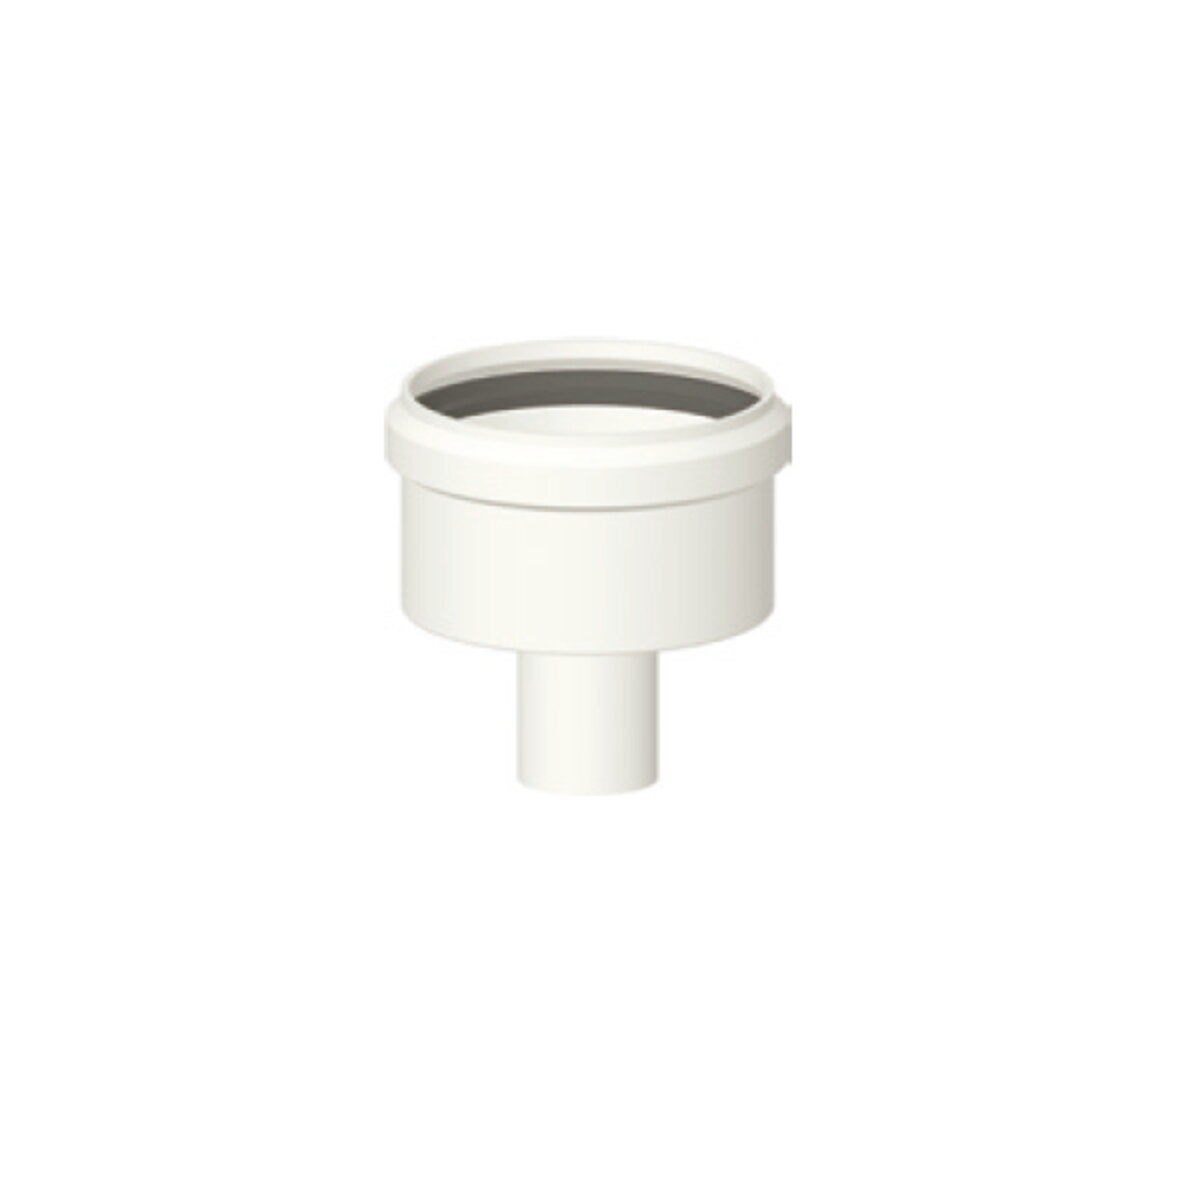 Condensate drain plug for condensing boiler fume outlet diam. 100mm. in pp